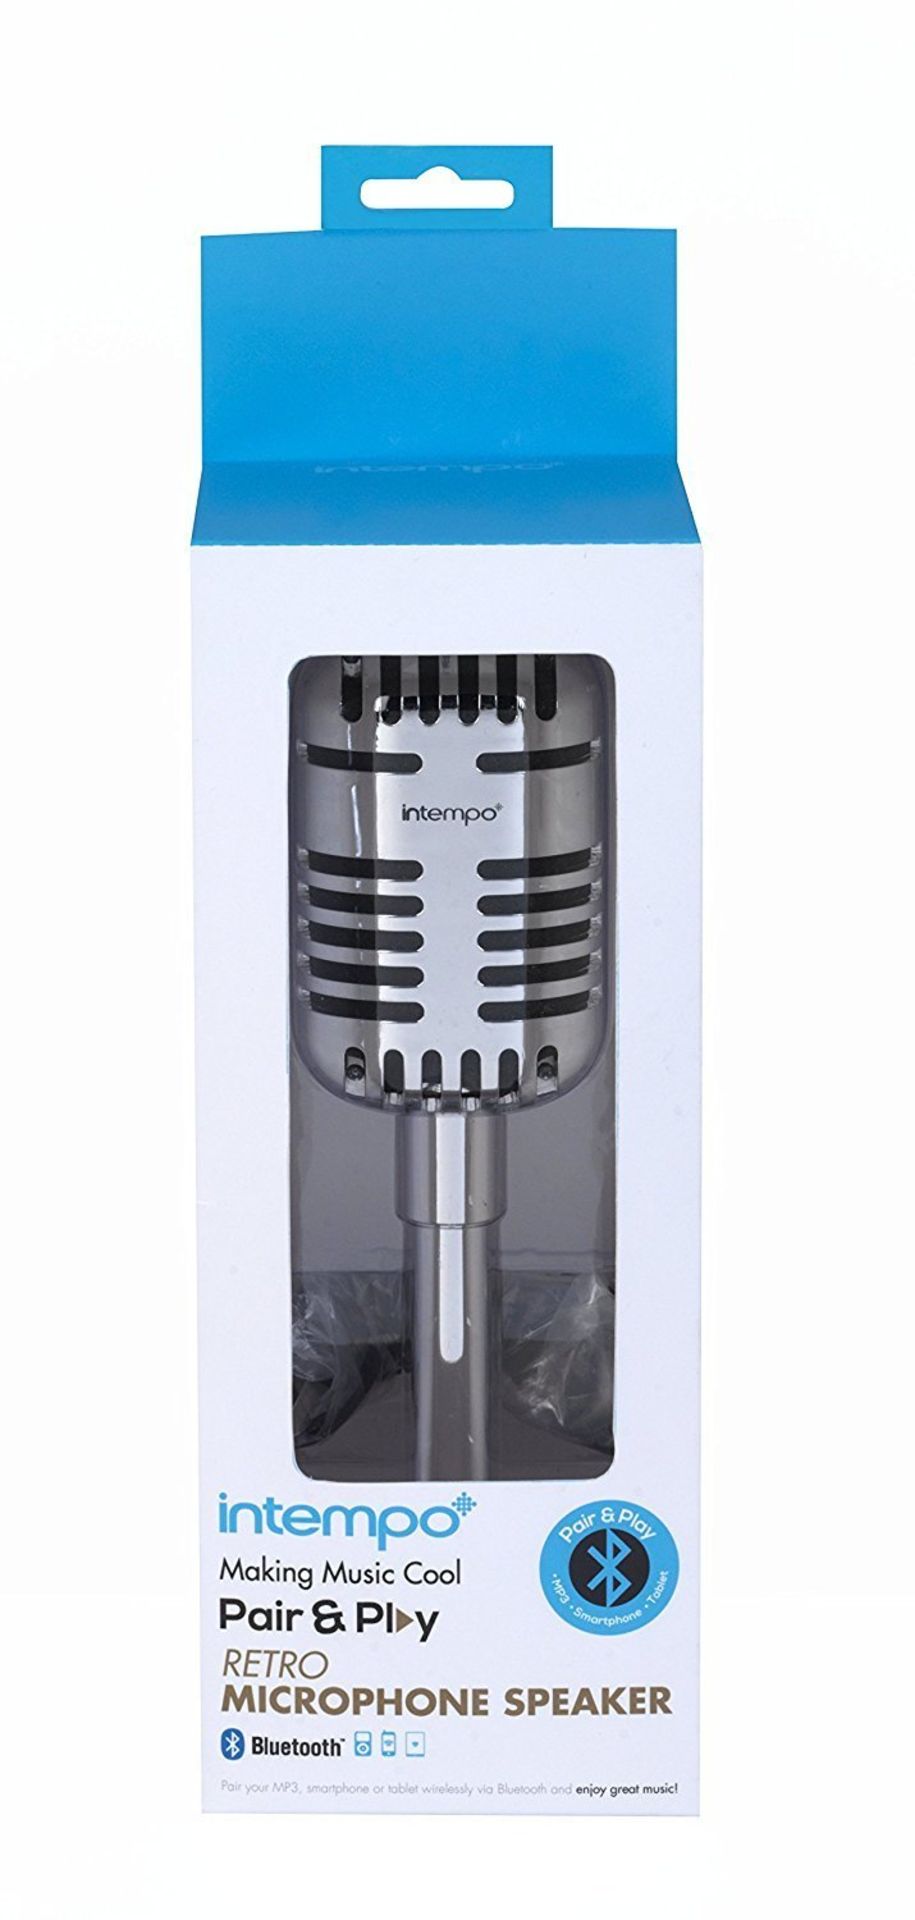 V Brand New Bluetooth Portable Microphone Speaker From Intempo - Built-In Microphone - Charging - Image 3 of 3